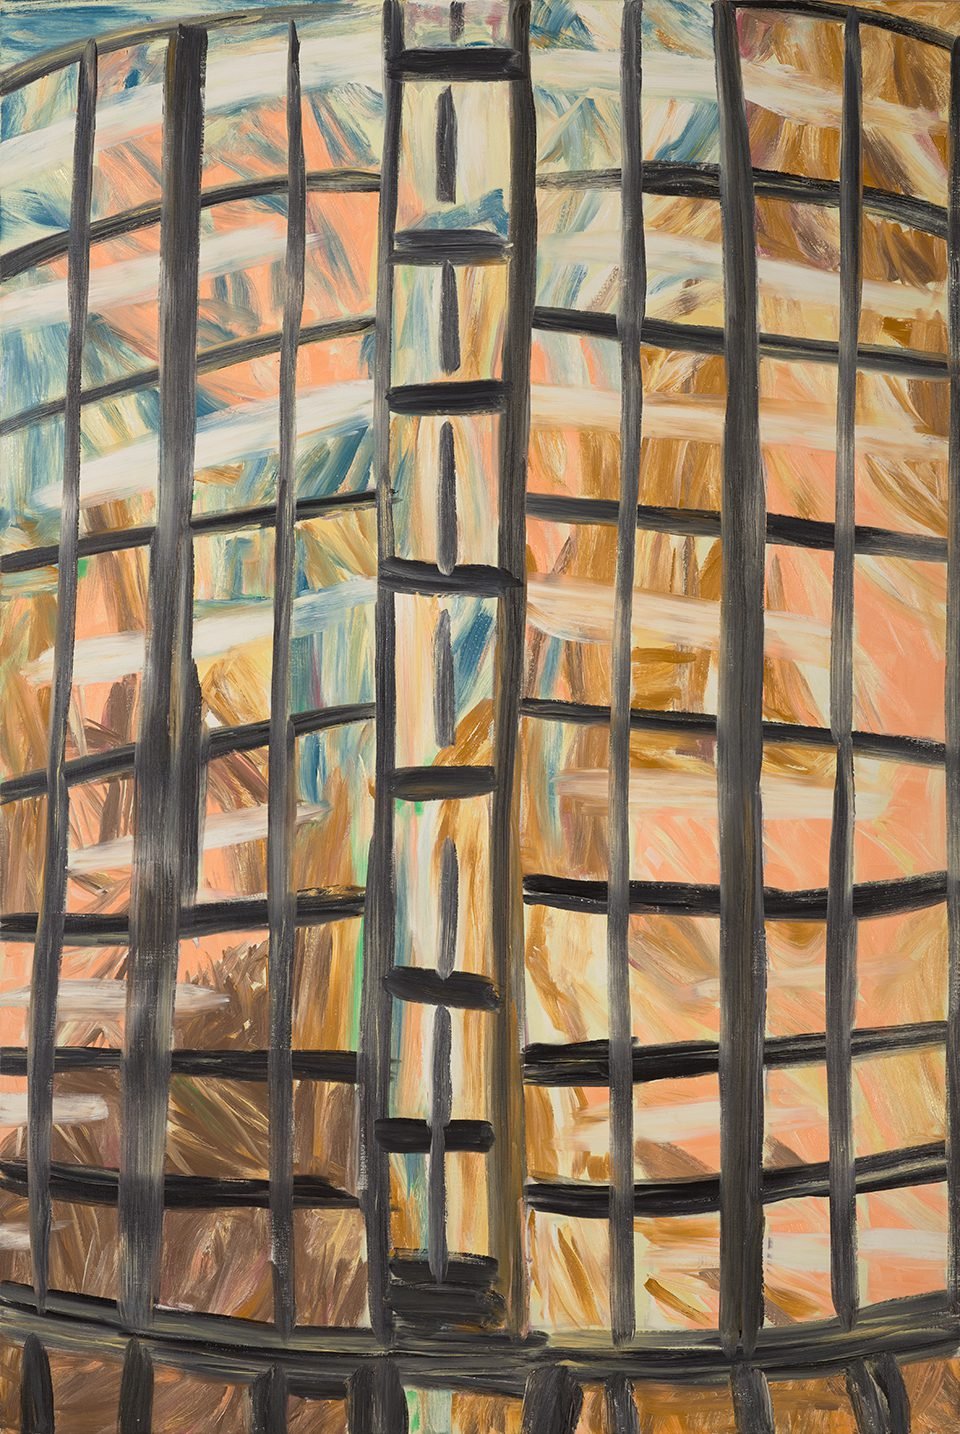   Reflections , 1989. Oil on canvas. 89.5 x 60 in. Collection  North Carolina Museum of Art , Raleigh 